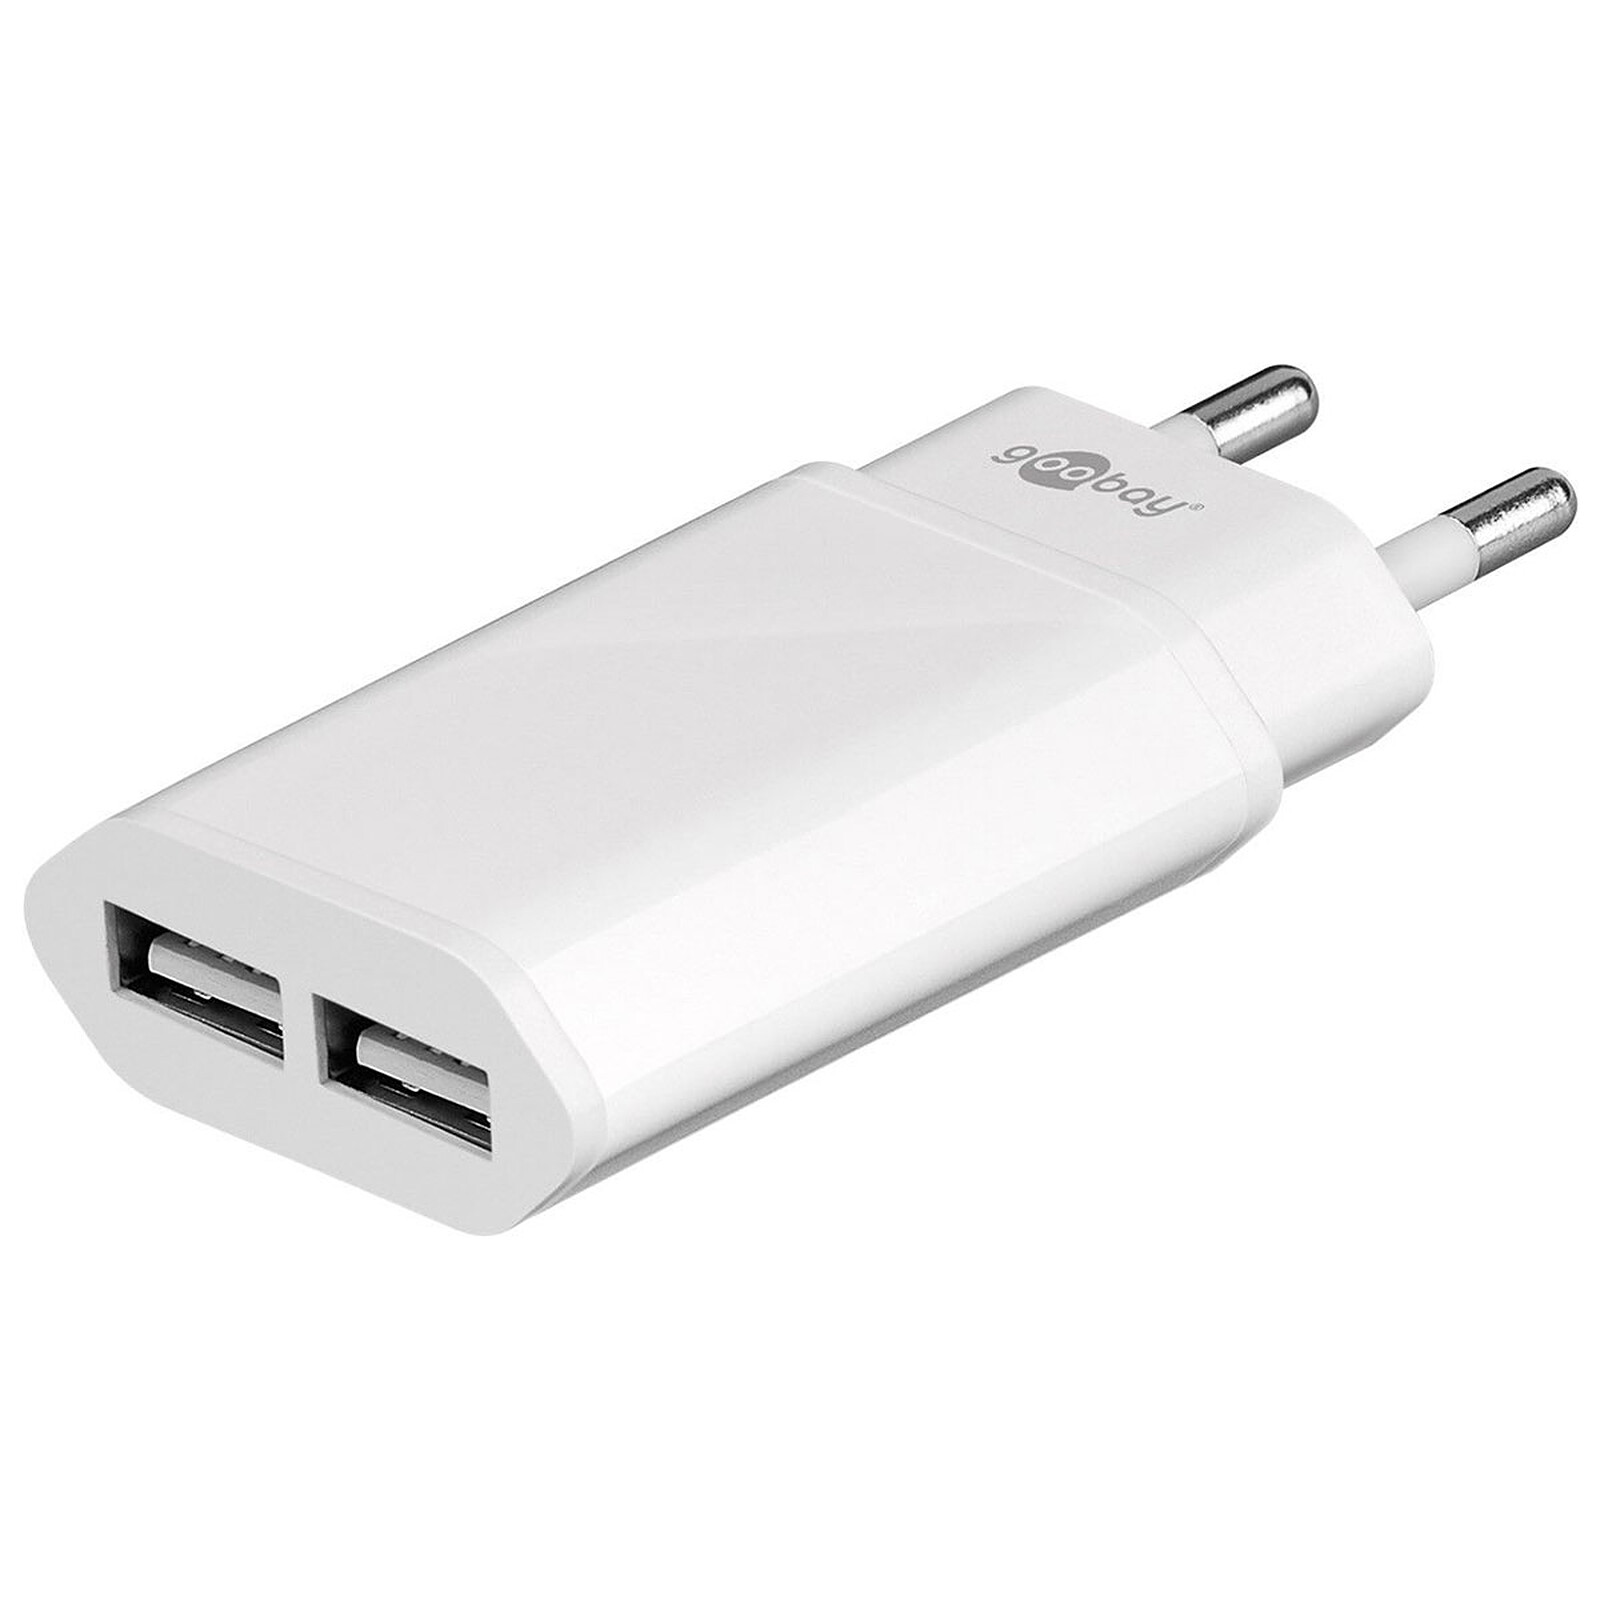  Chargeur Usb Double